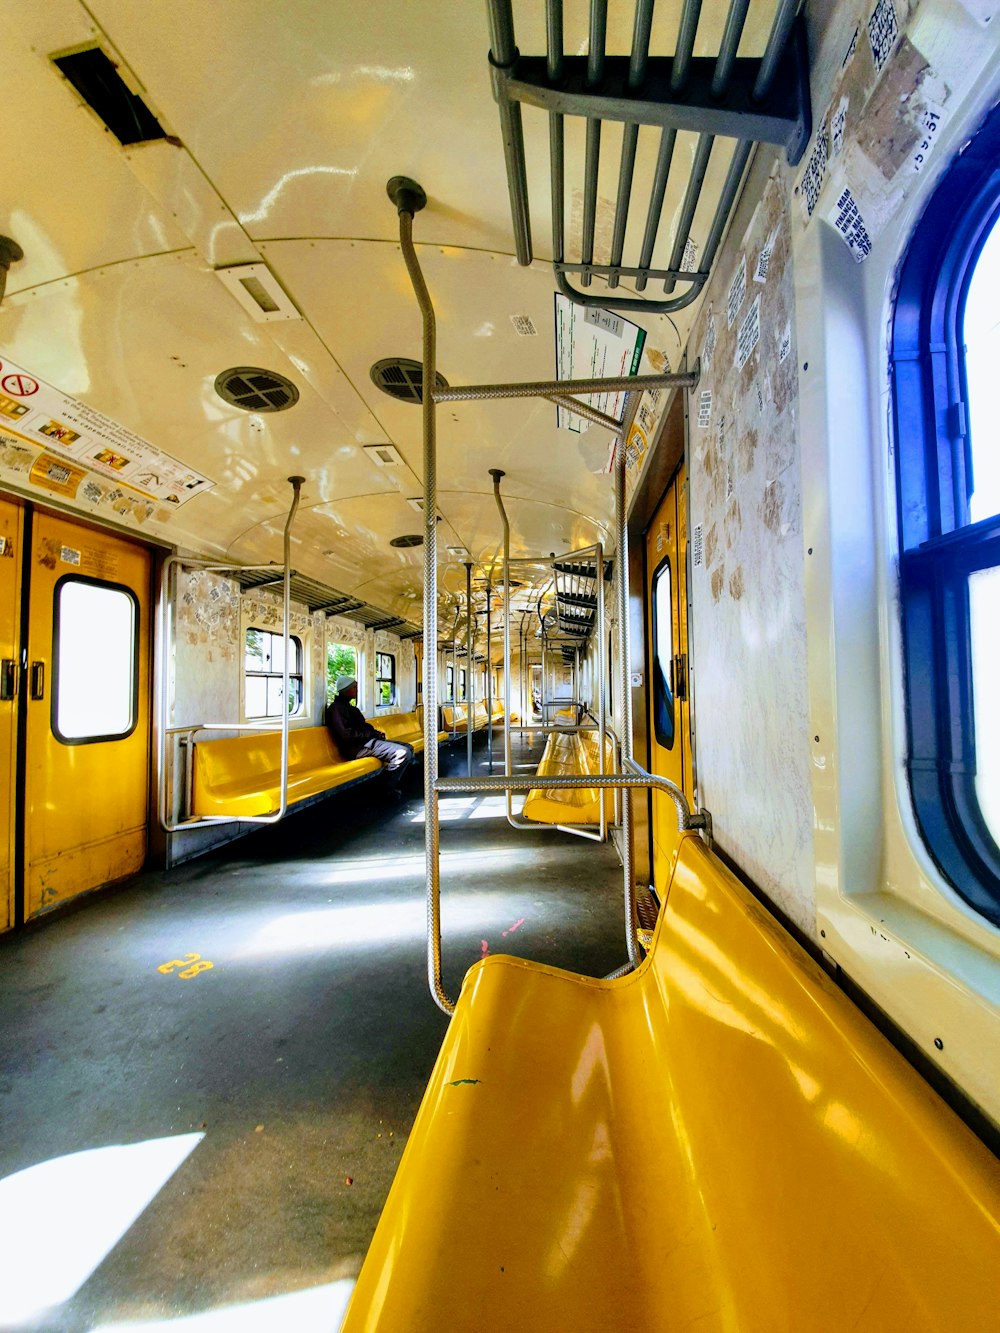 yellow and blue train in train station